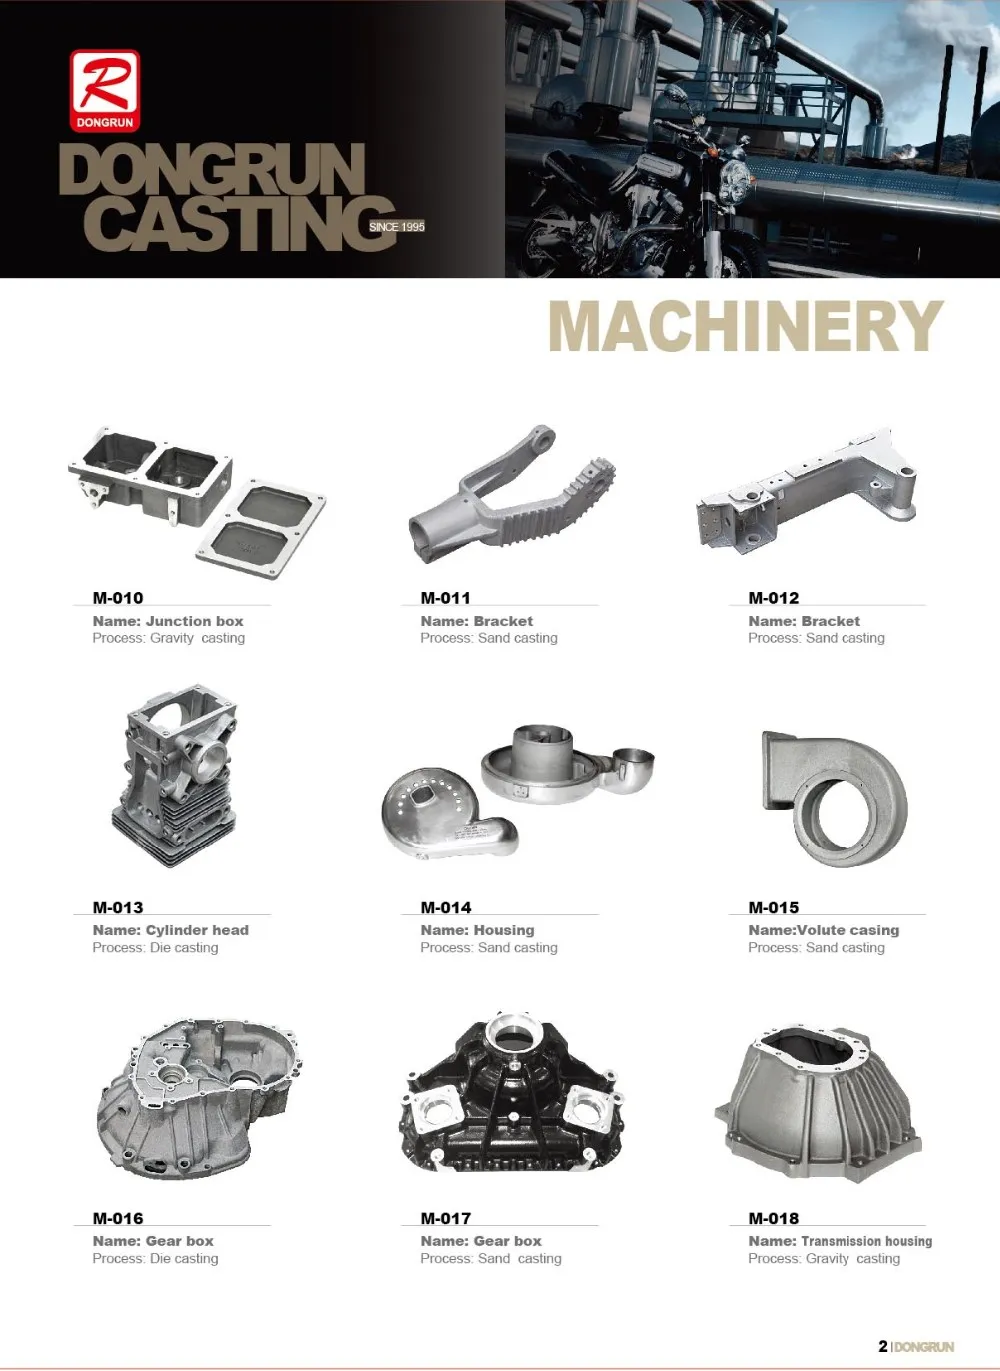 Supply oem sand casting aluminum intake manifold for performance car as drawing or sample automobile engine factory